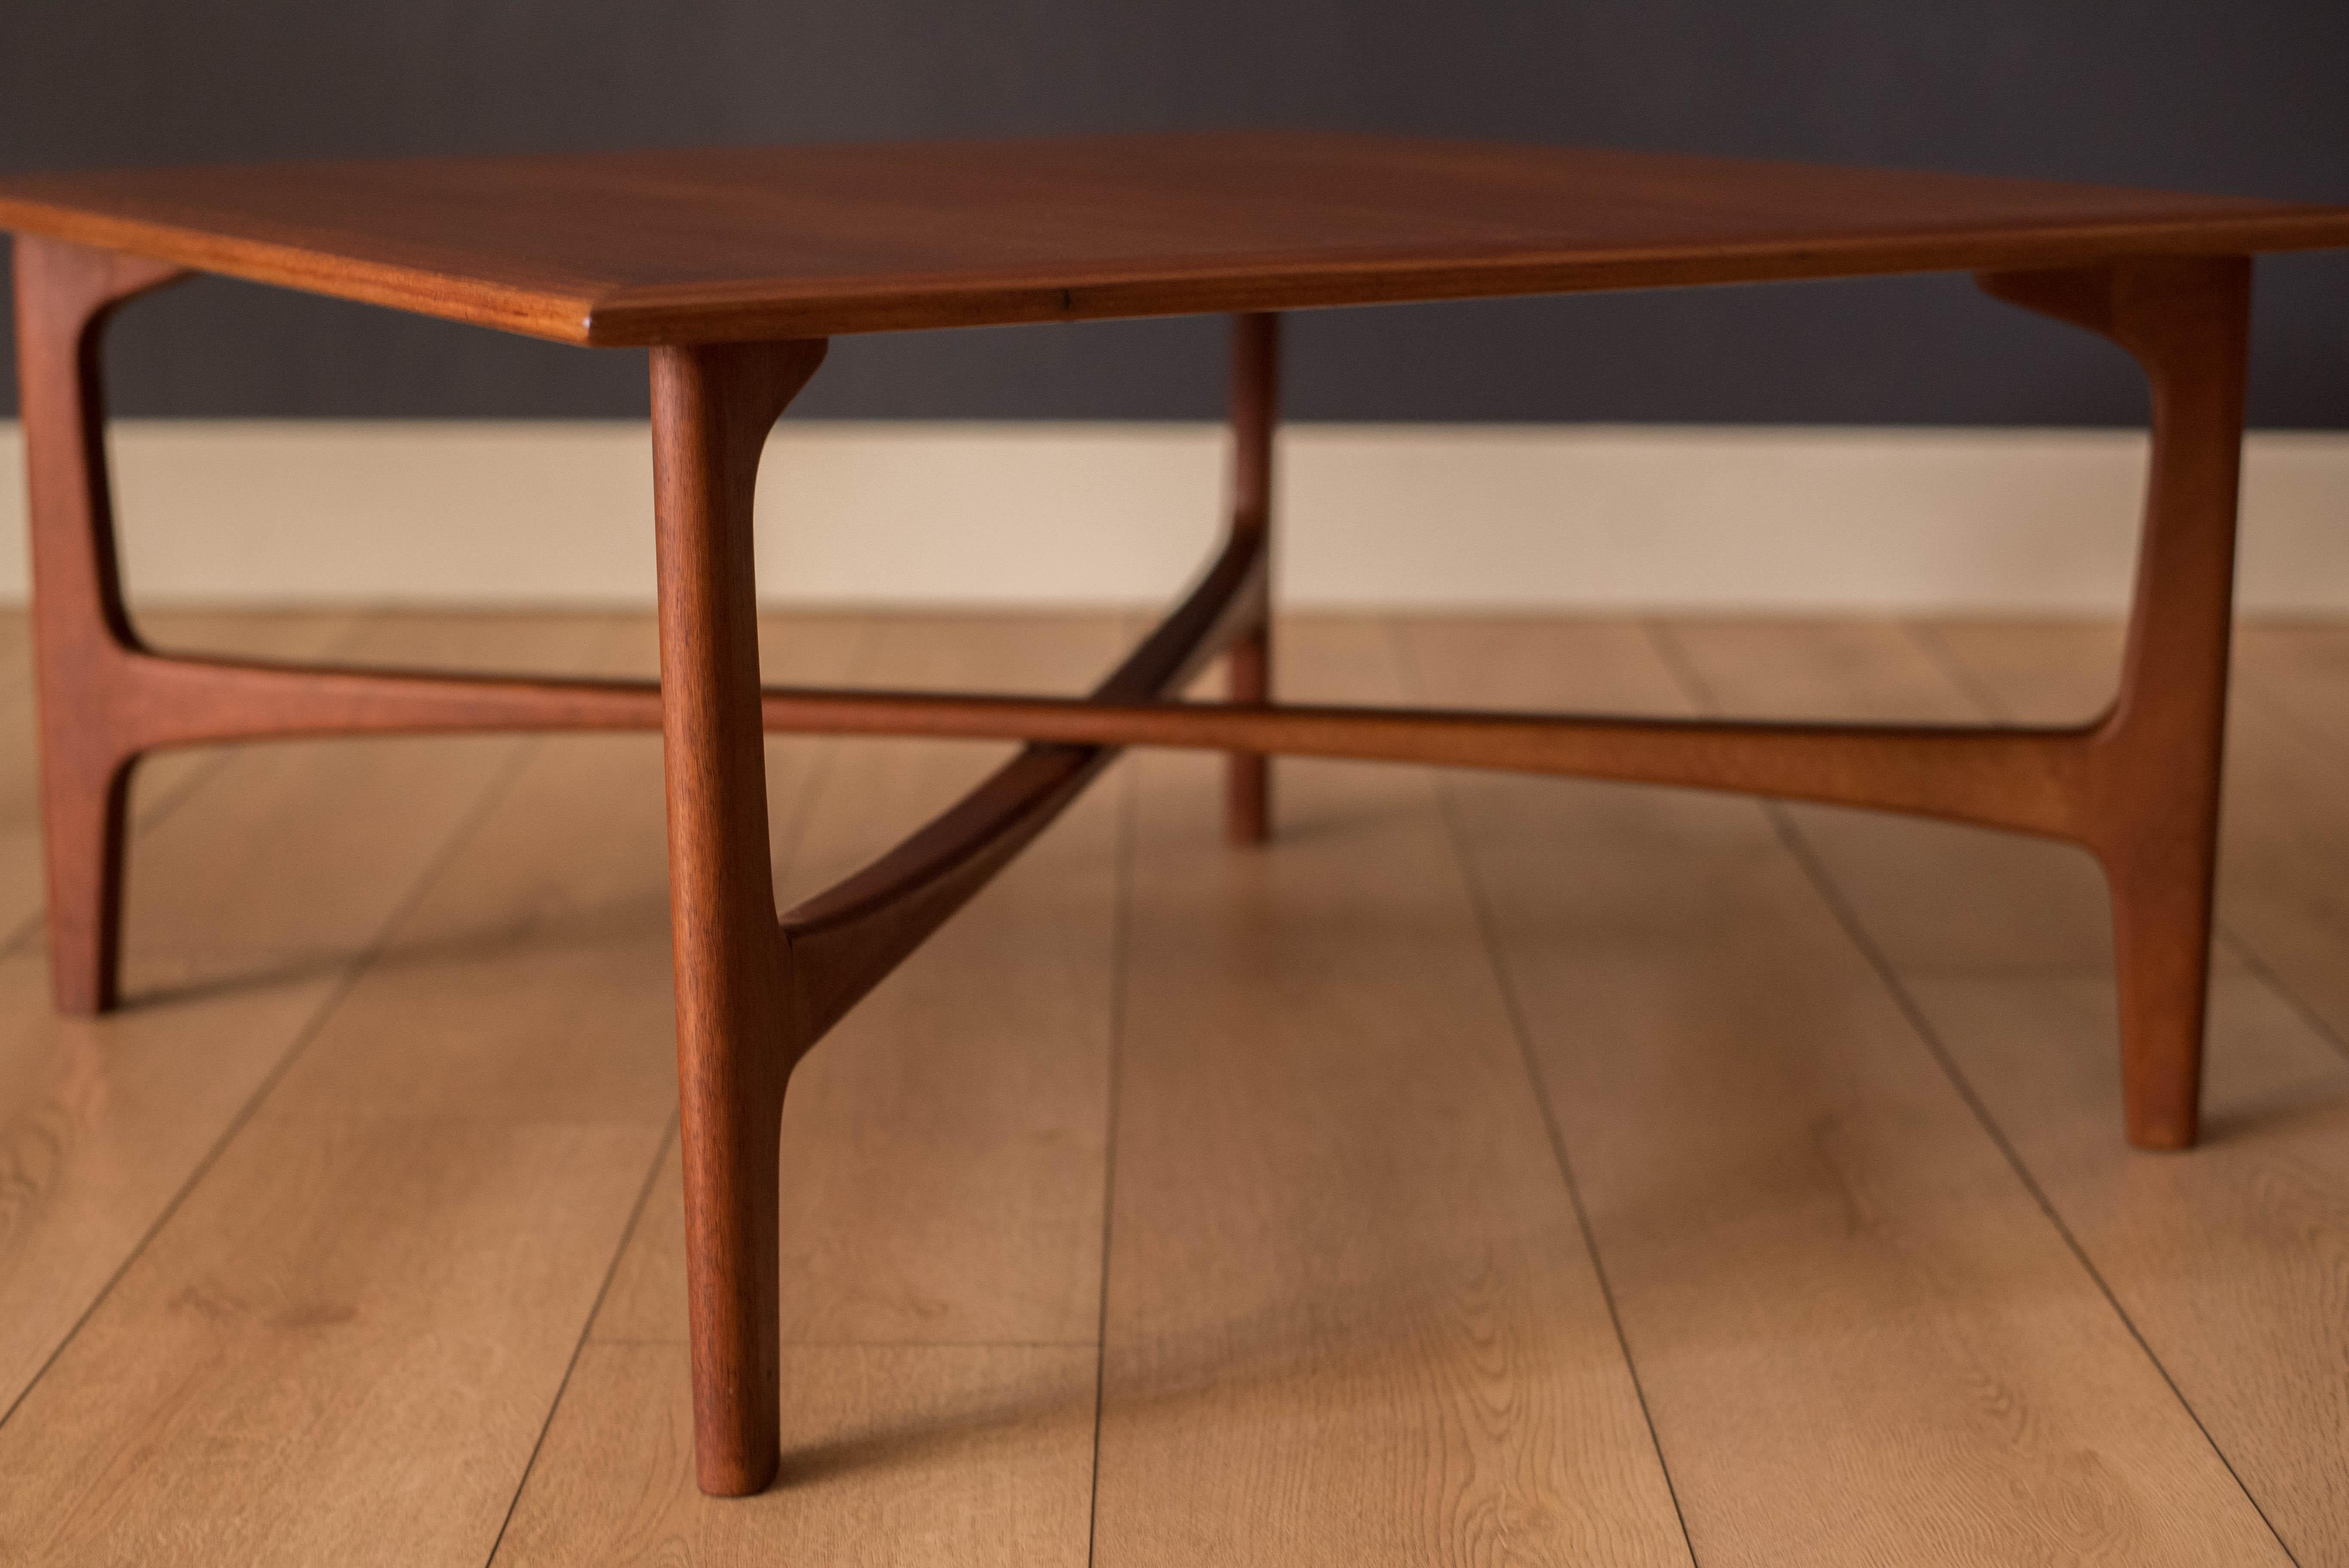 Mid-20th Century Danish Modern Teak Square Coffee Table by Folke Ohlsson for Dux